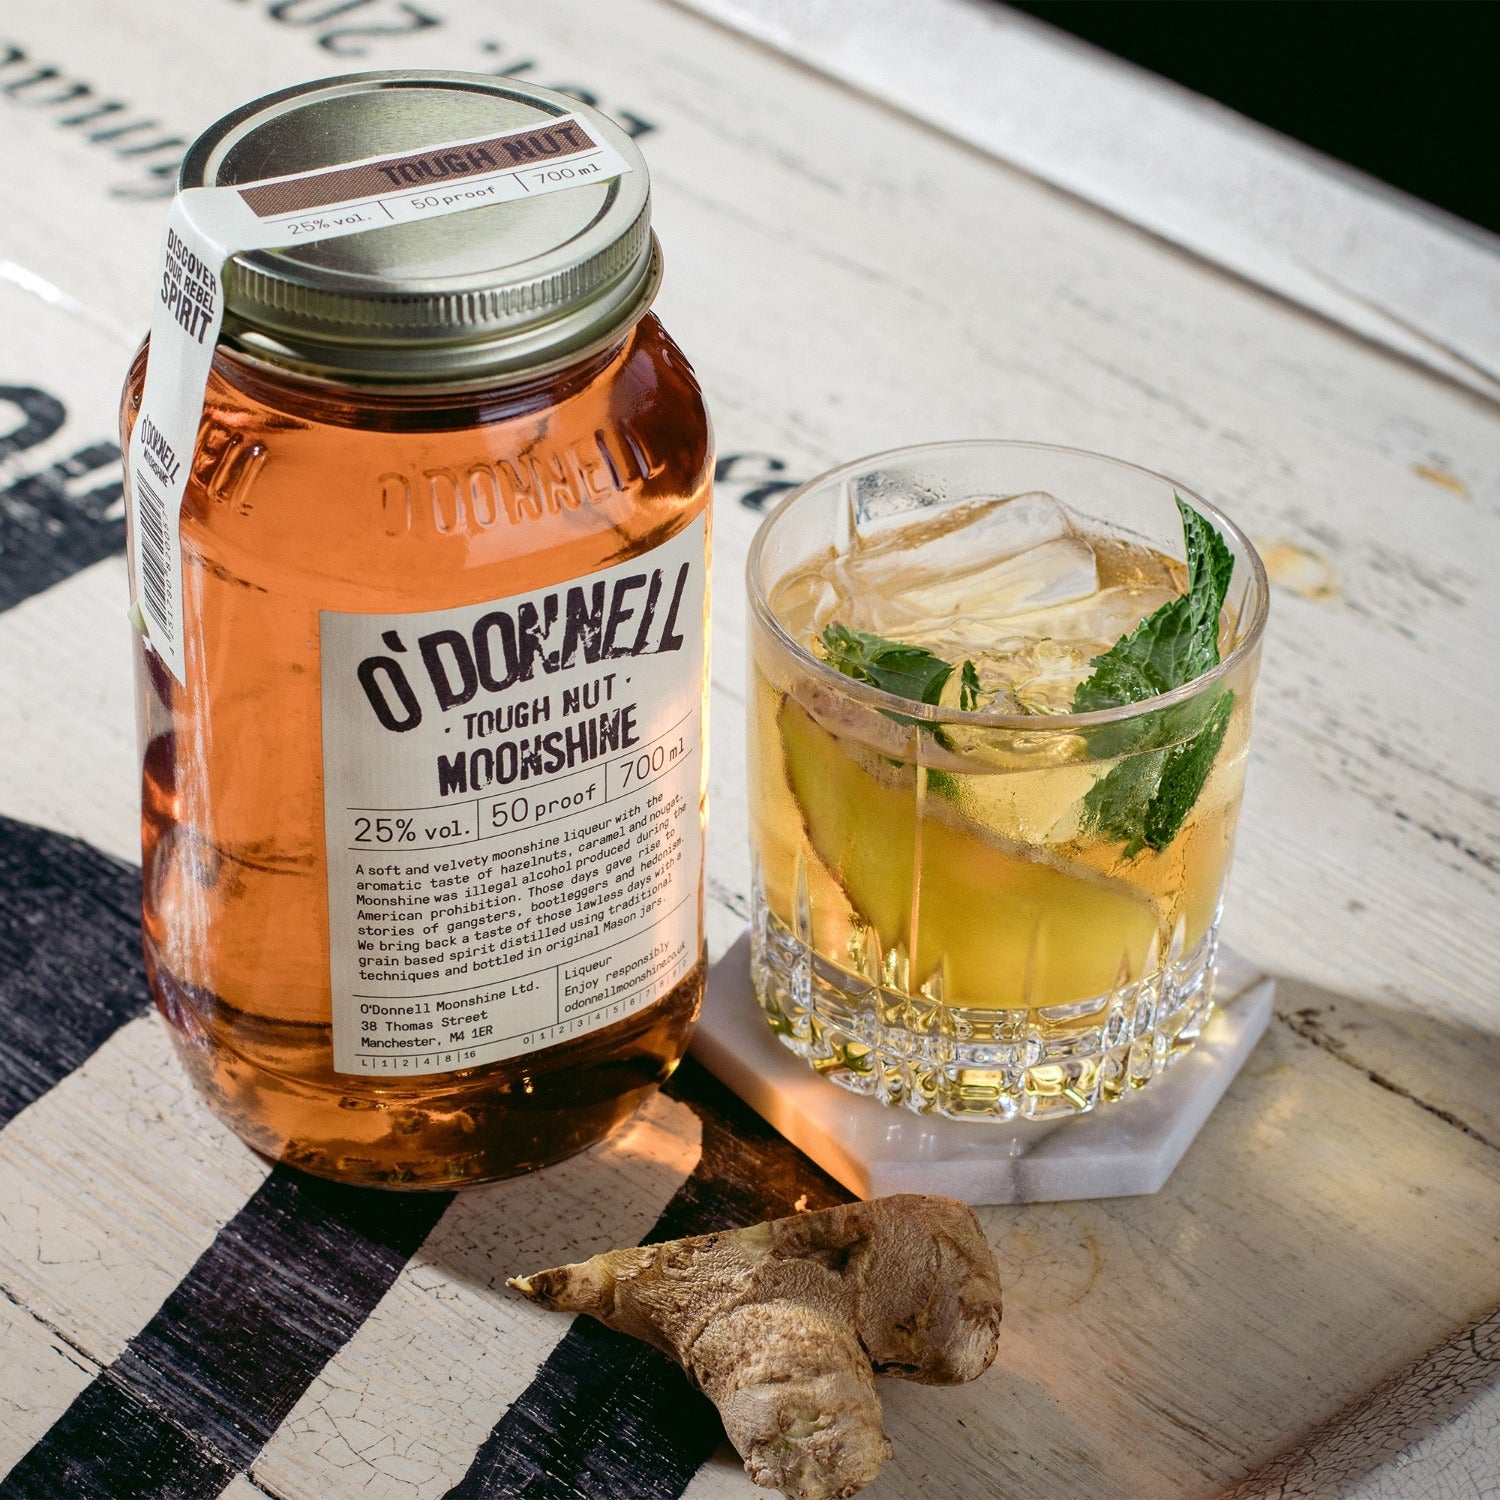 O'Donnell Moonshine Tough Nut cocktail long drink